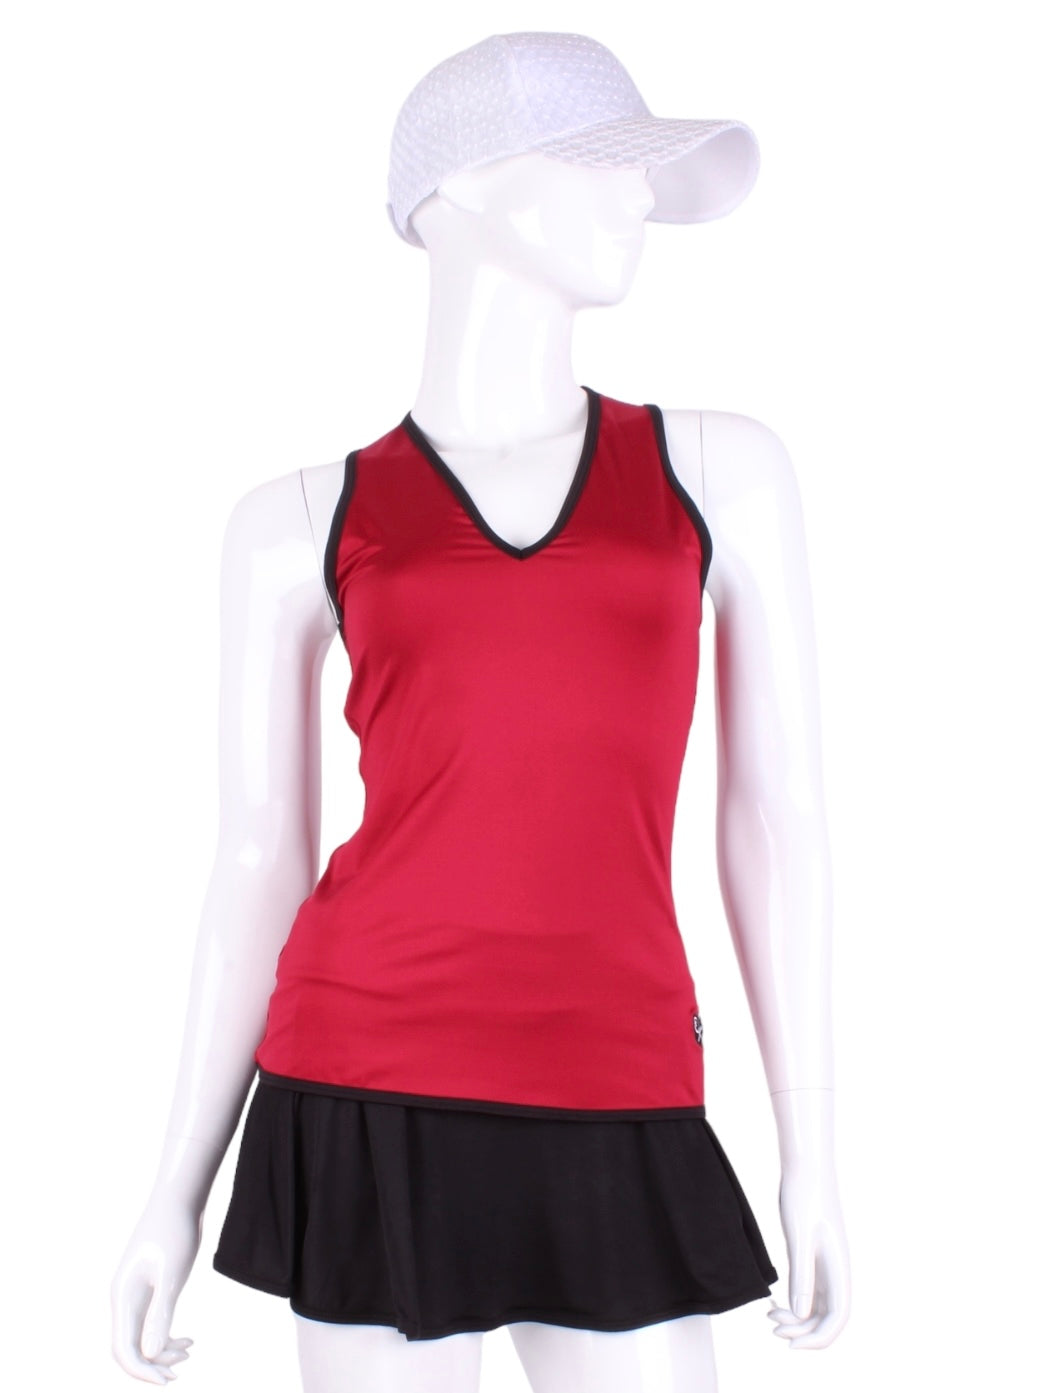 Straight Back Vee Tank Red Raspberry With Black Trim. The simply elegant Vee Tank has a little vee in the front and a straight back.  Designed by a tennis player for comfort AND luxury - the pattern is made for a real woman’s body with curves and all!  The material is stretchy and soft.  As with all of our apparel - it’s designed and hand made in Downtown Los Angeles - from imported fabric.